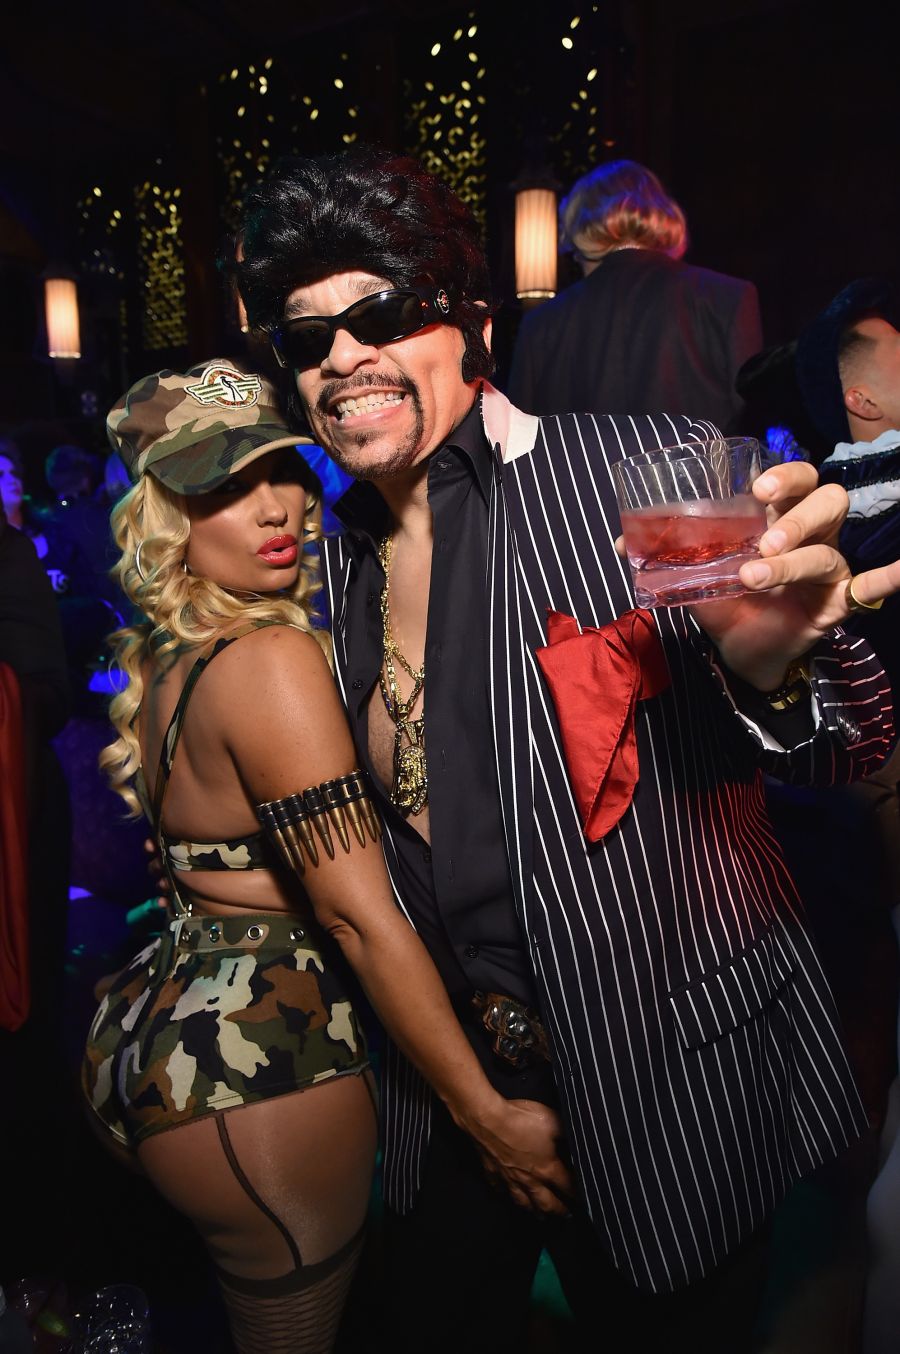 14 Pics Of IceT & Coco Over The Years 93.9 WKYS